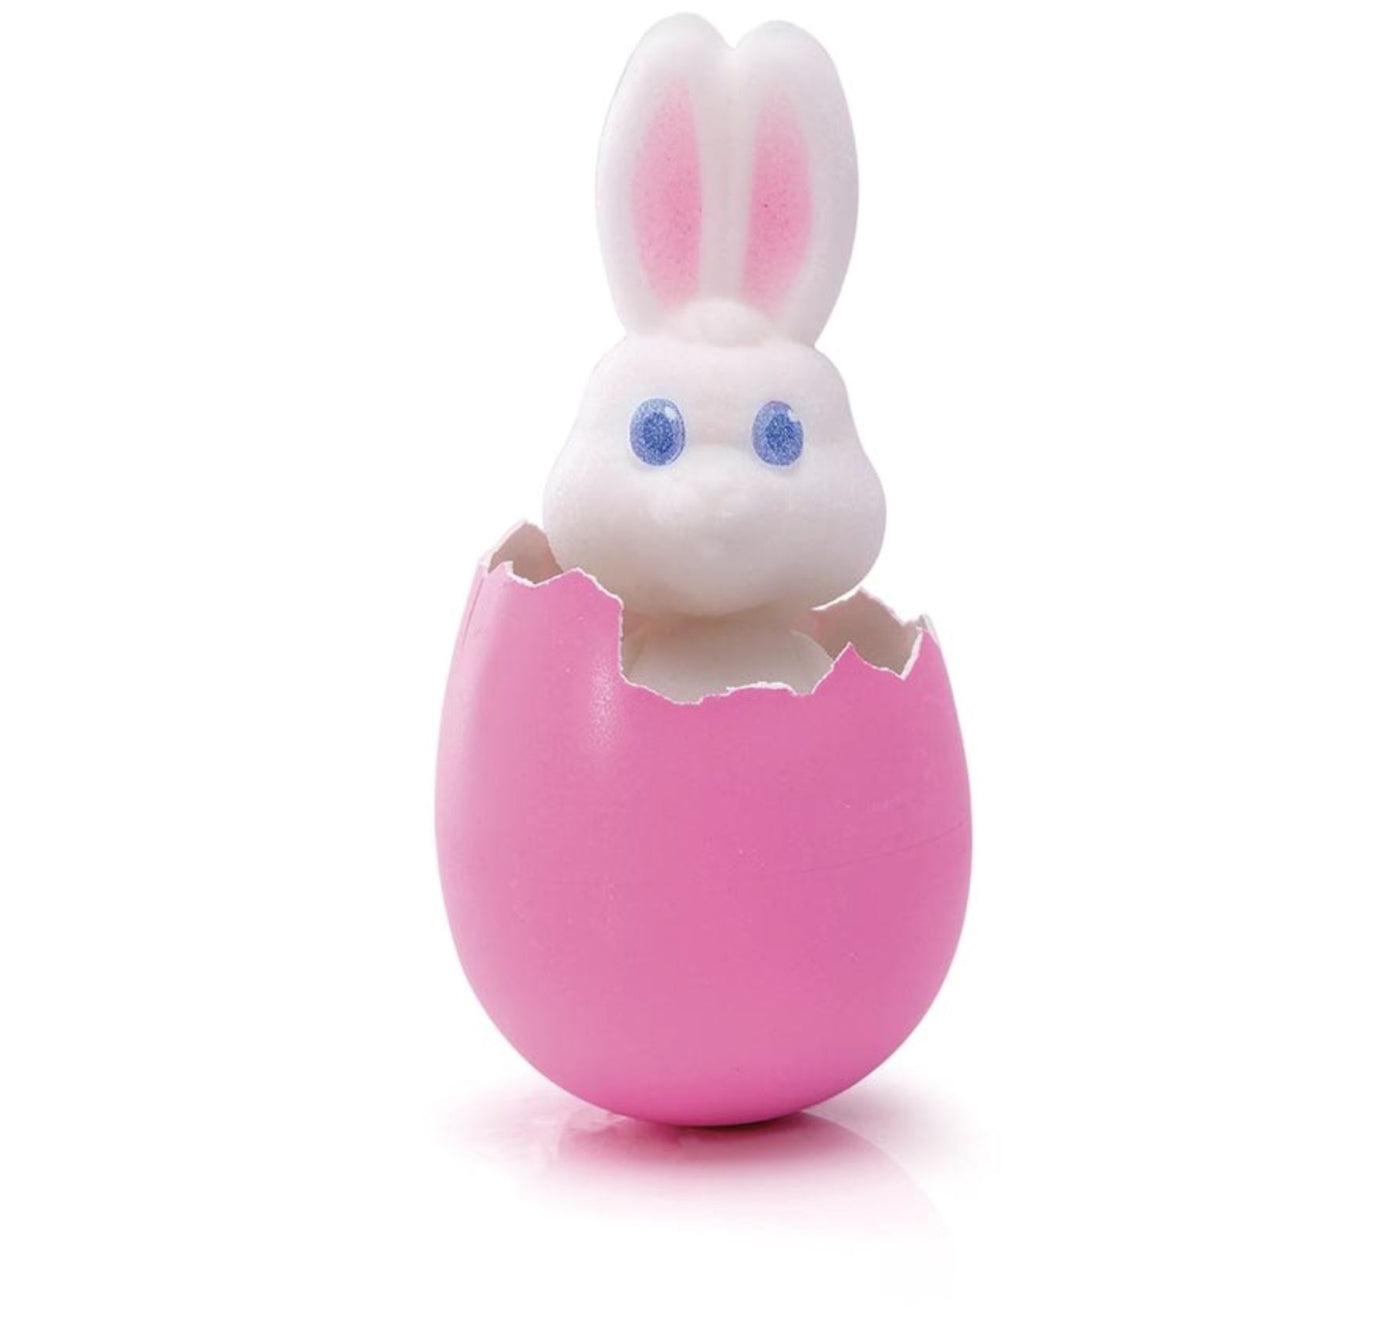 Hatch It - Chicks & Bunnies Toy IS Gifts 